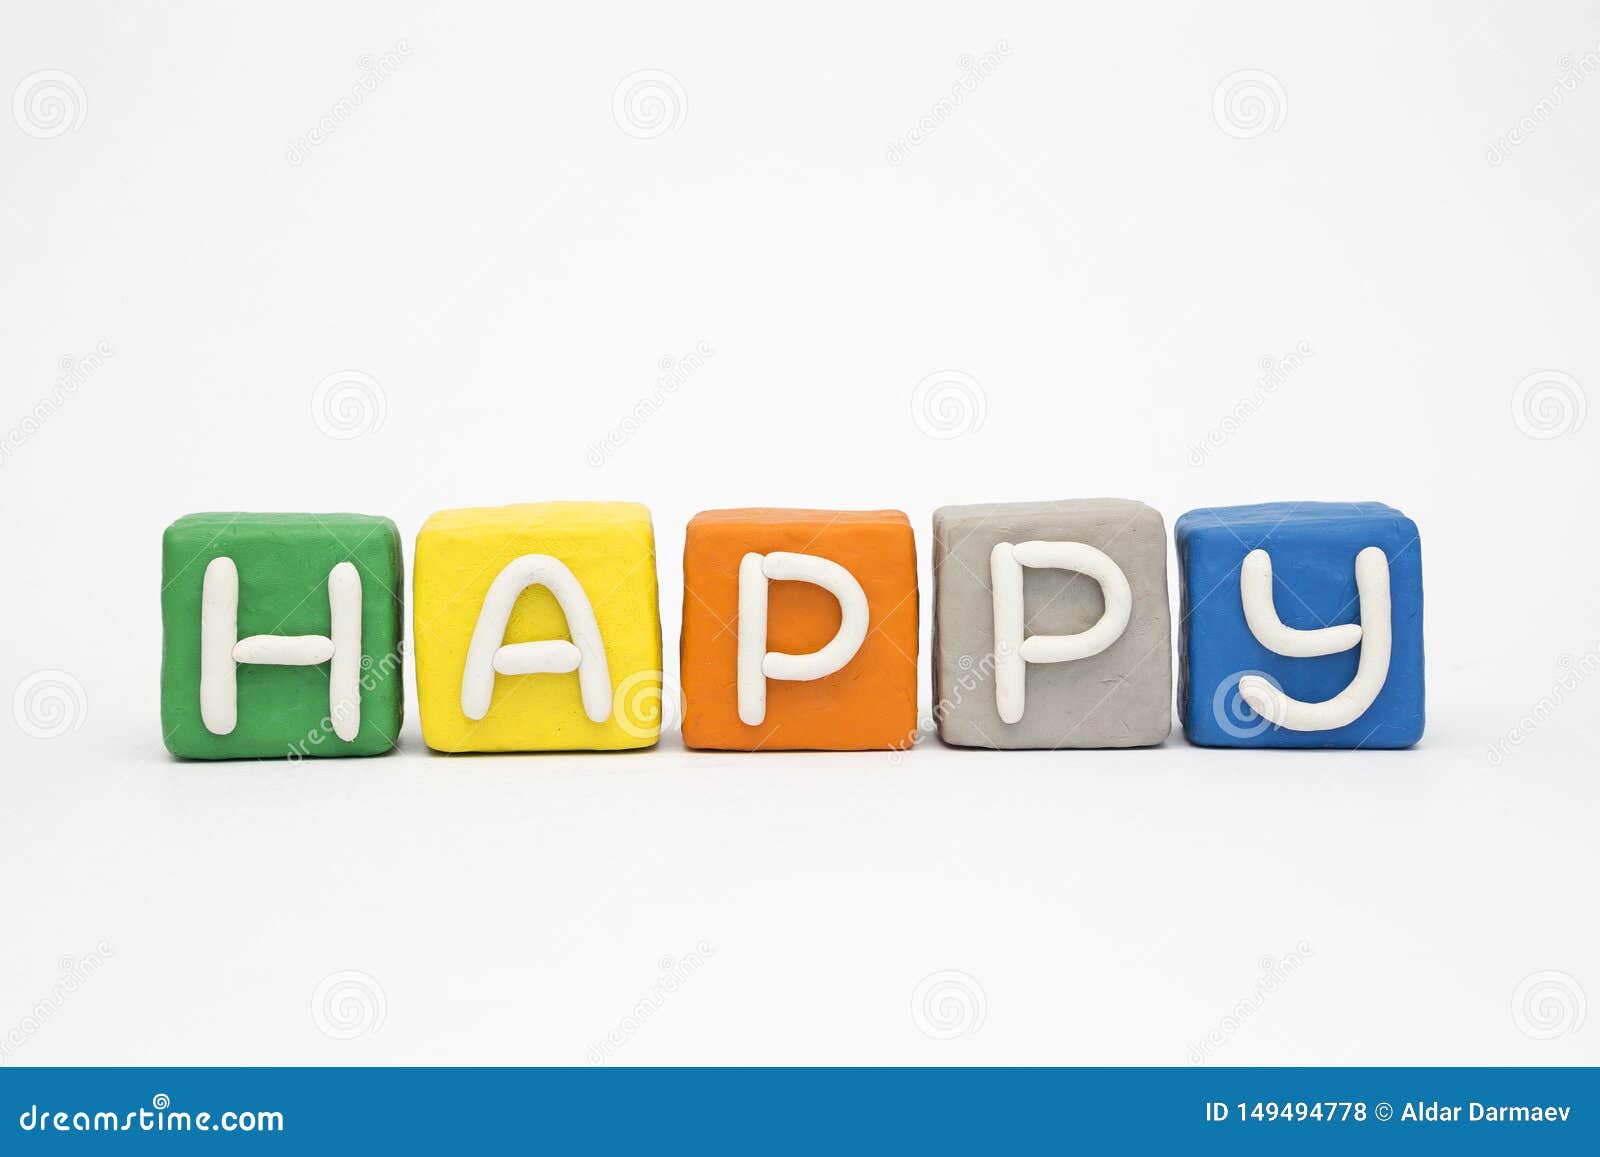 The Word `Happy` on the Clay Colorful Blocks Stock Photo - Image of ...